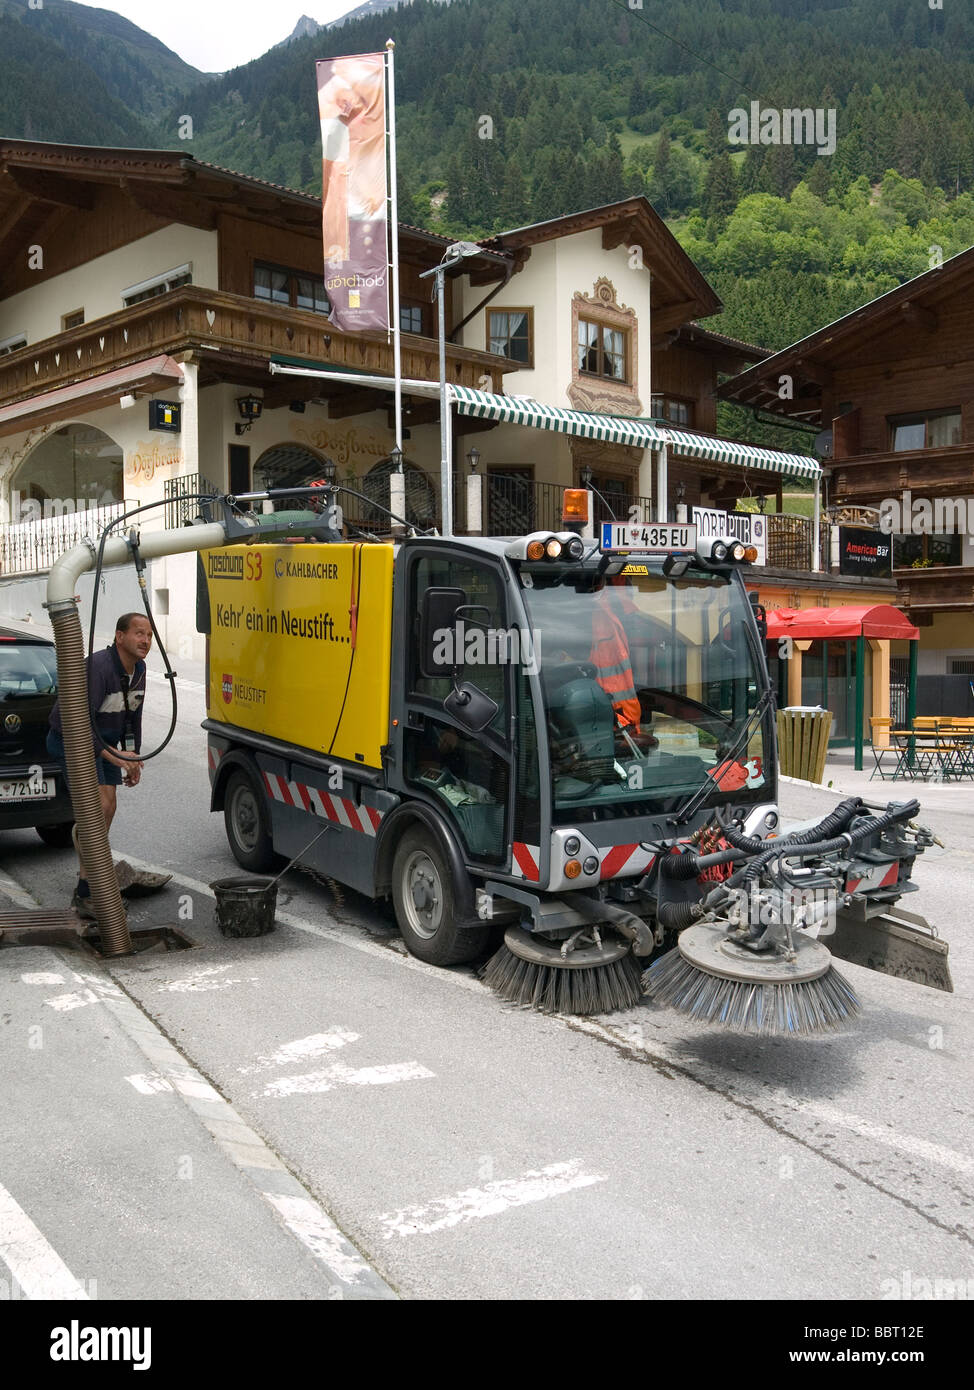 Local authority workman with a cleaning vehicle using an interceptor to clear a drain in Neustift Austria EU Stock Photo